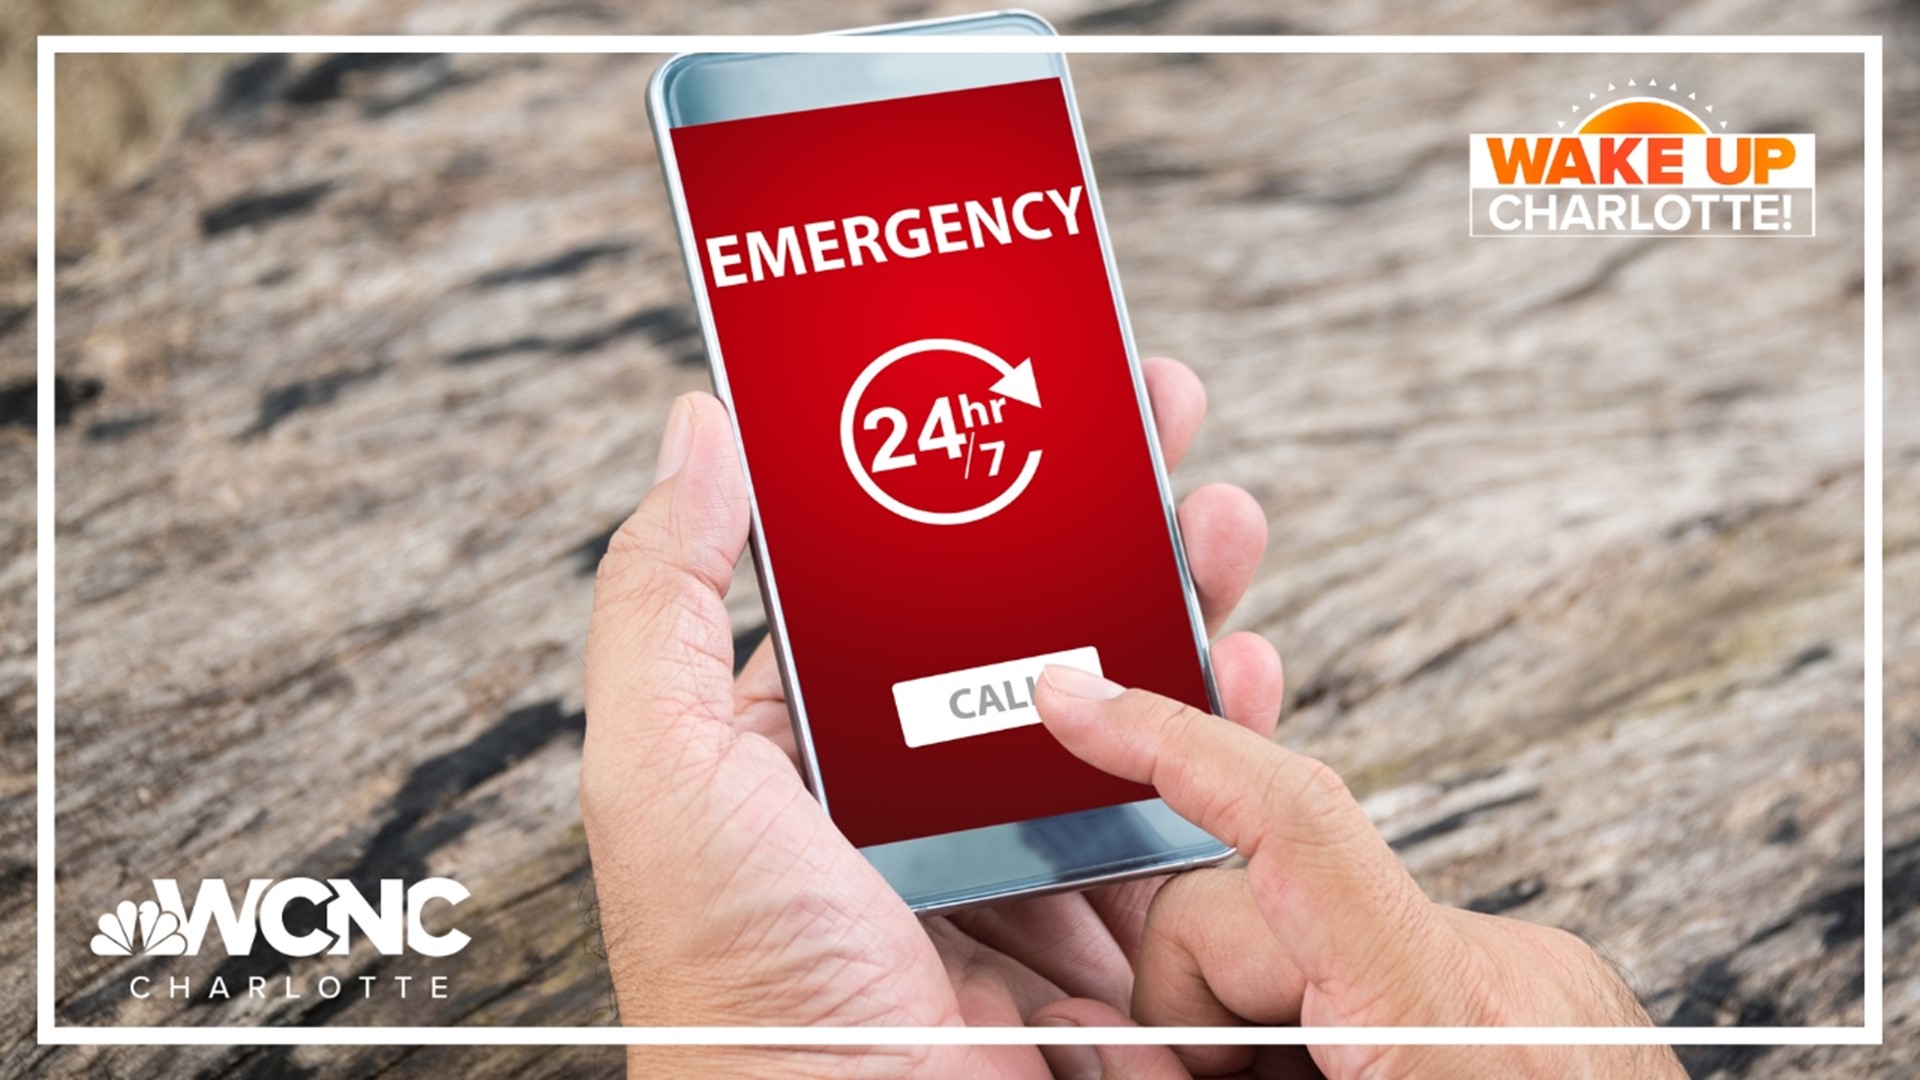 The Emergency Alert System (EAS) test will sound on radios and TVs, while Wireless Emergency Alerts (WEA) will be sent to cell phones across America.